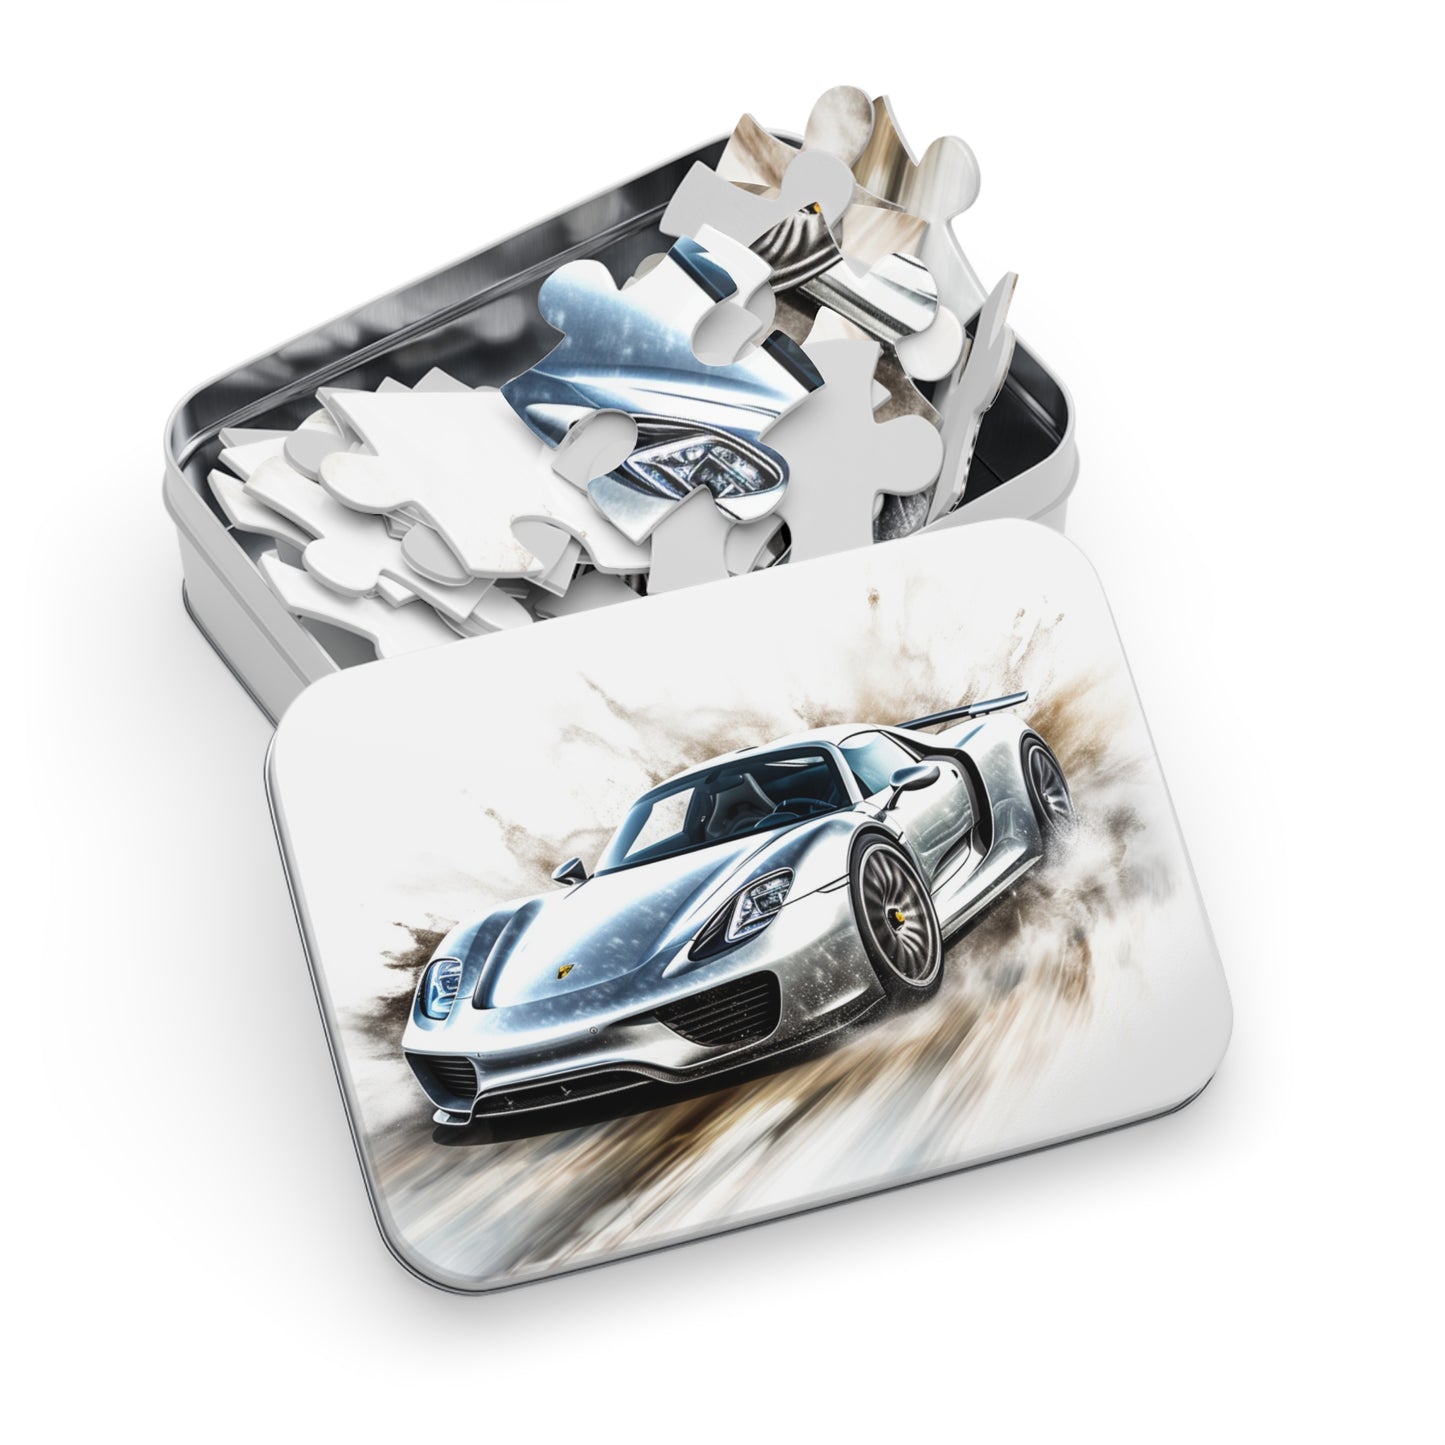 Jigsaw Puzzle (30, 110, 252, 500,1000-Piece) 918 Spyder white background driving fast with water splashing 2